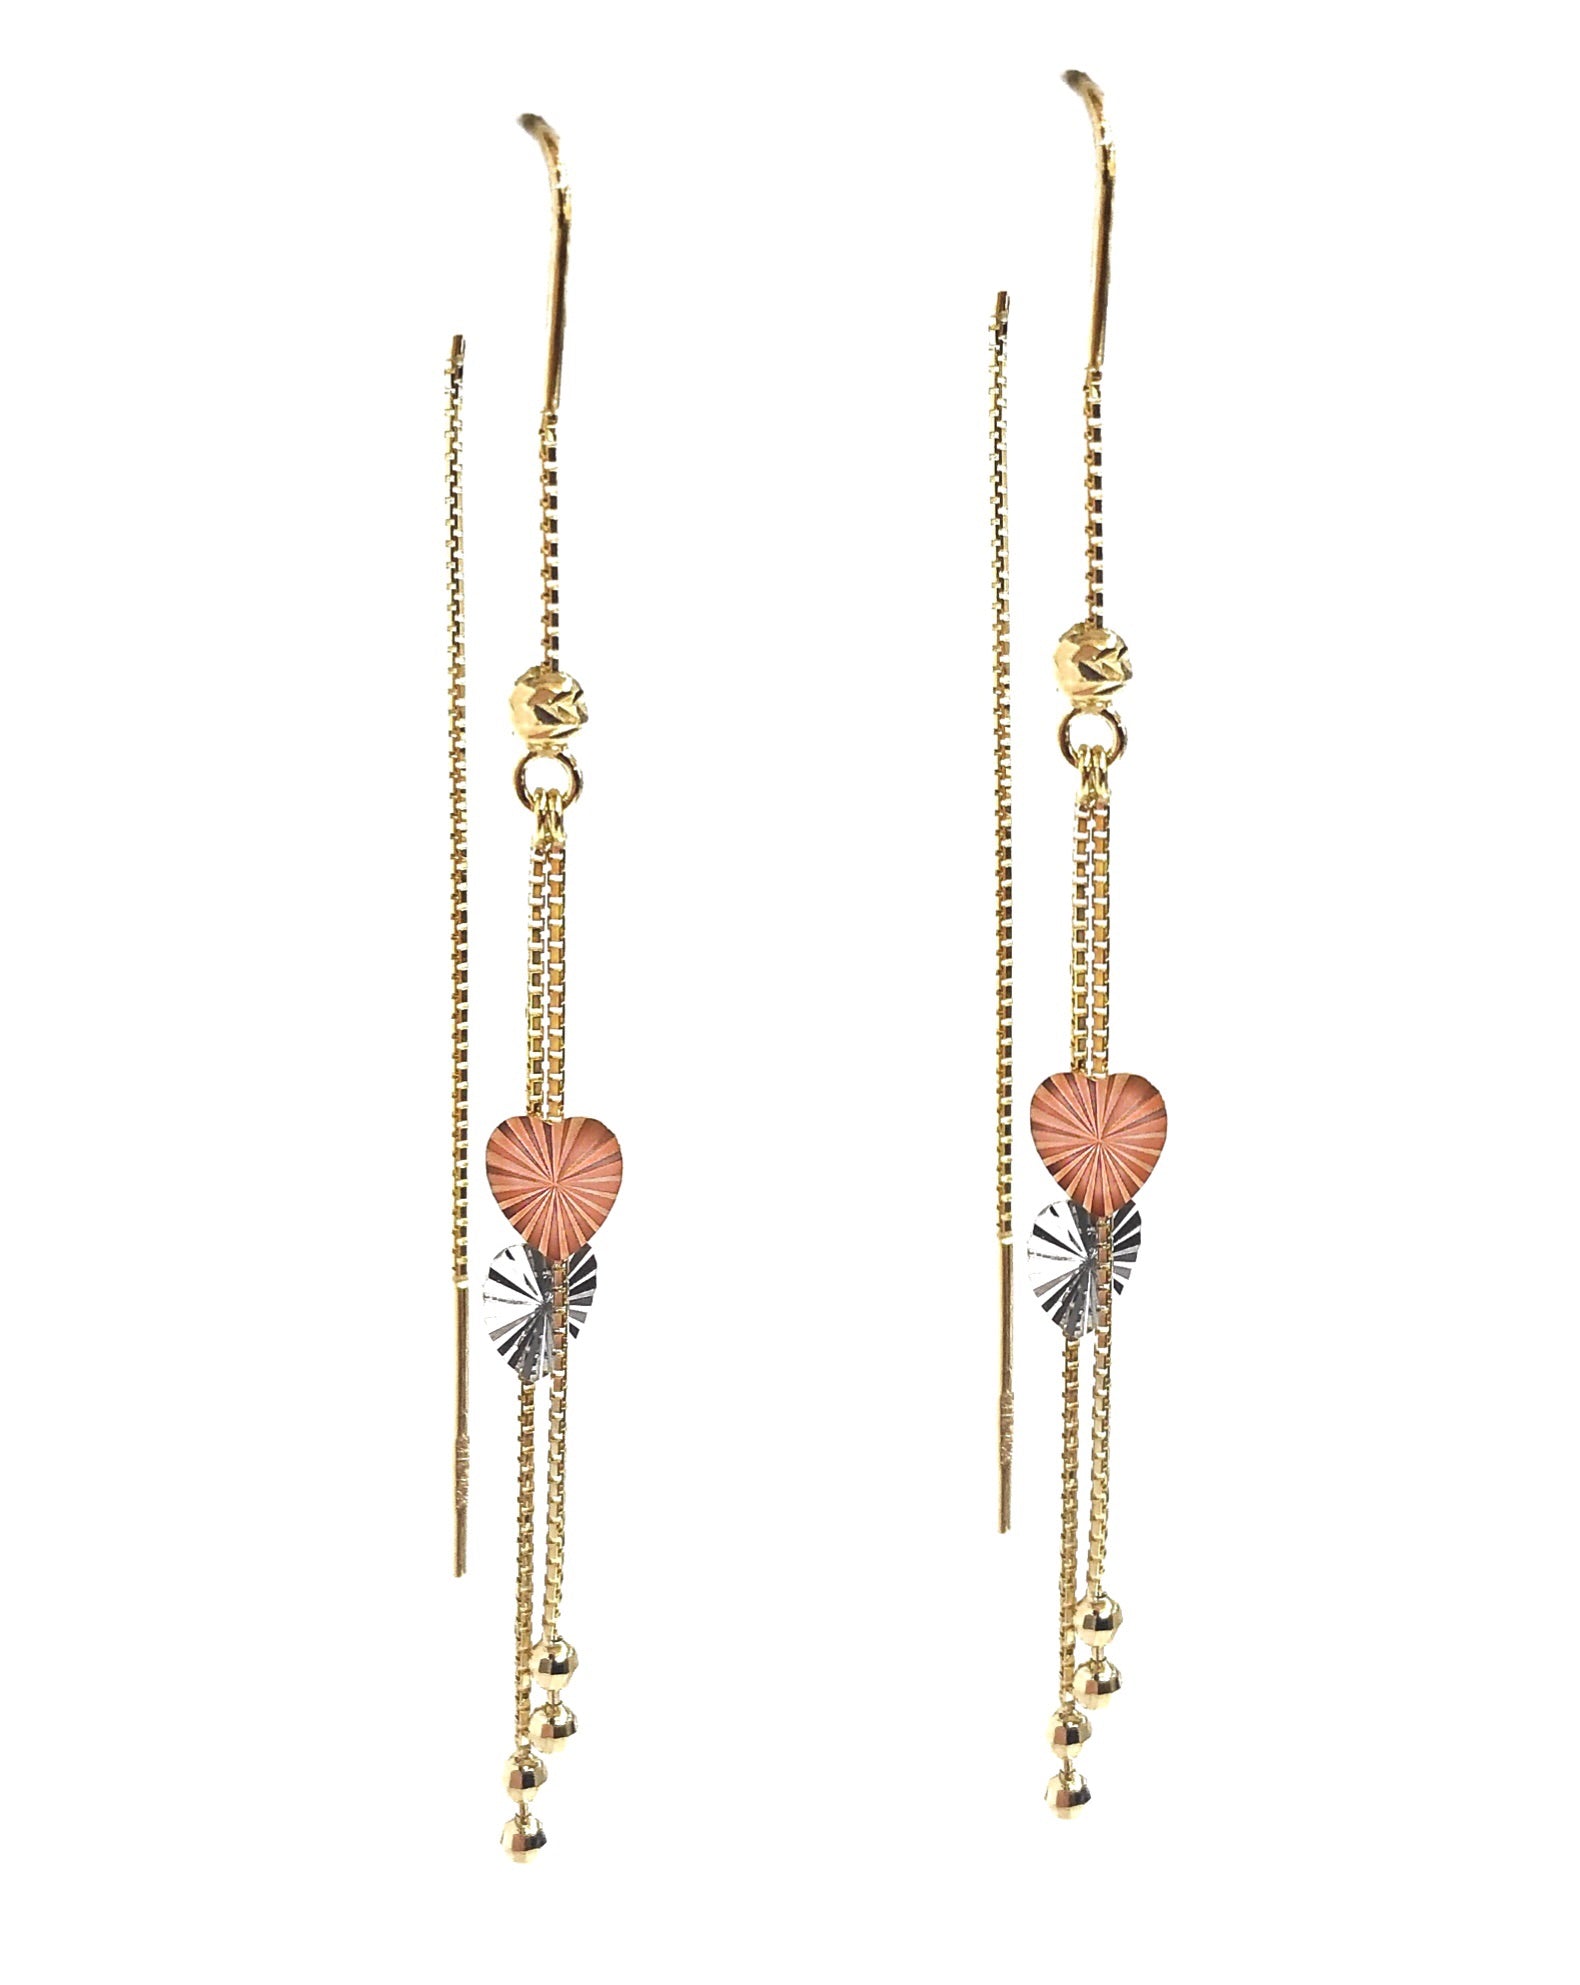 14K YELLOW GOLD LOVEJOY THREADER EARRINGS -TRI COLOR